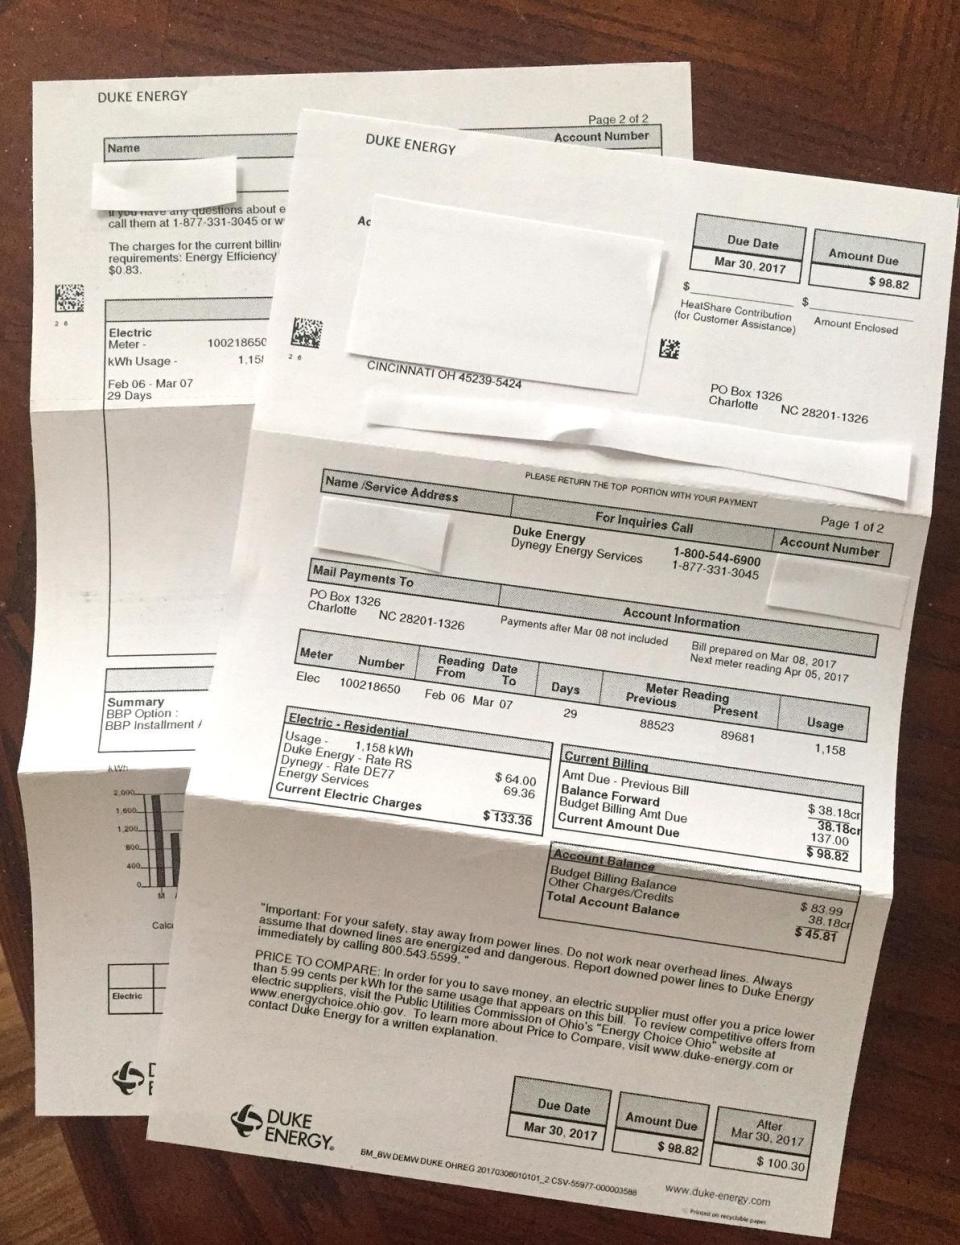 According to the Office of the Ohio Consumers' Counsel, electric bills are designed to show consumers how much energy has been used in their homes and how much it will cost them.